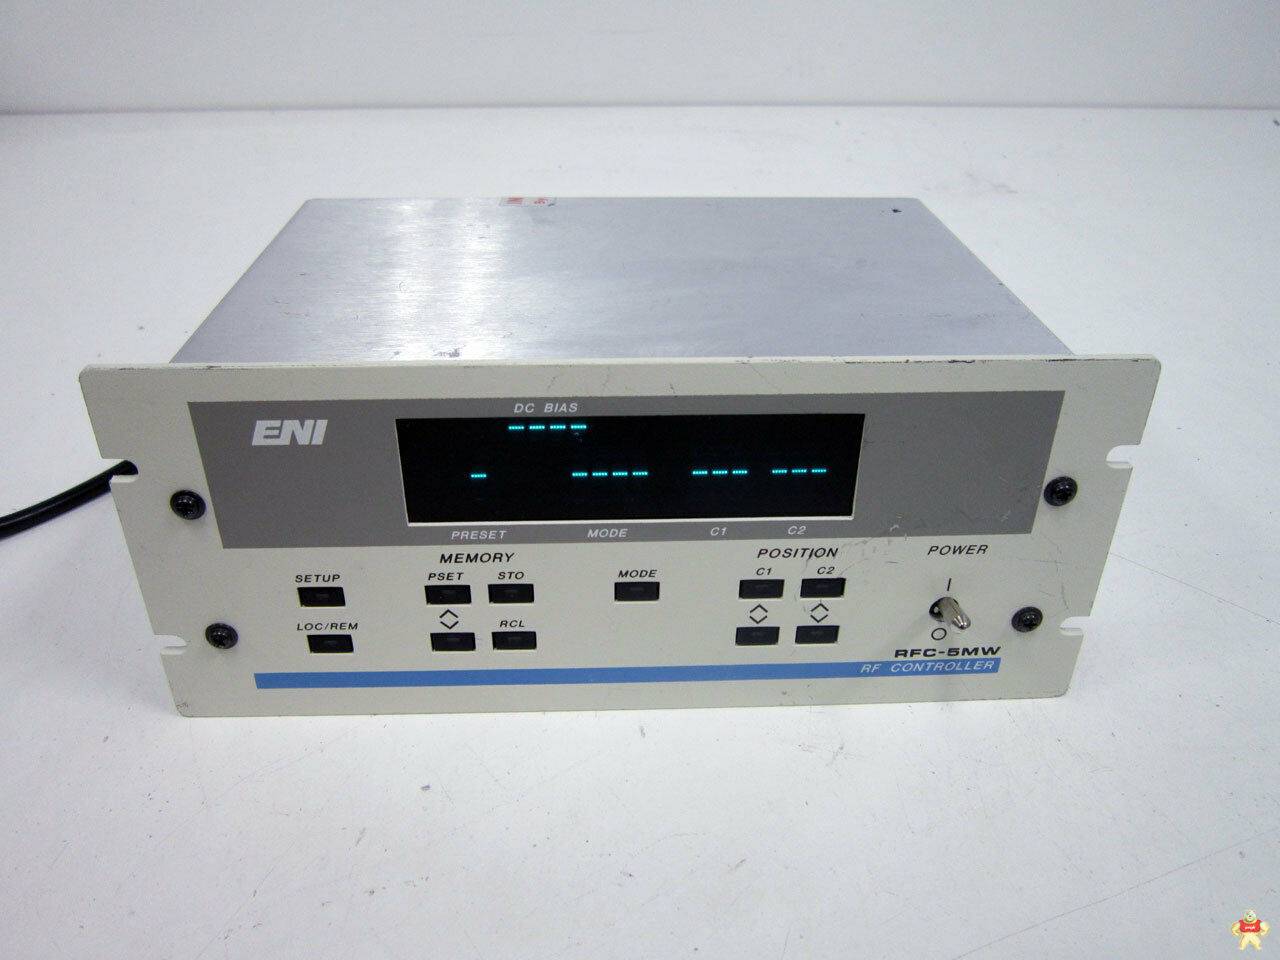 Extreme Networks Alpine 3808 9 Slot Switch Chassis 45080  802000-00-06 